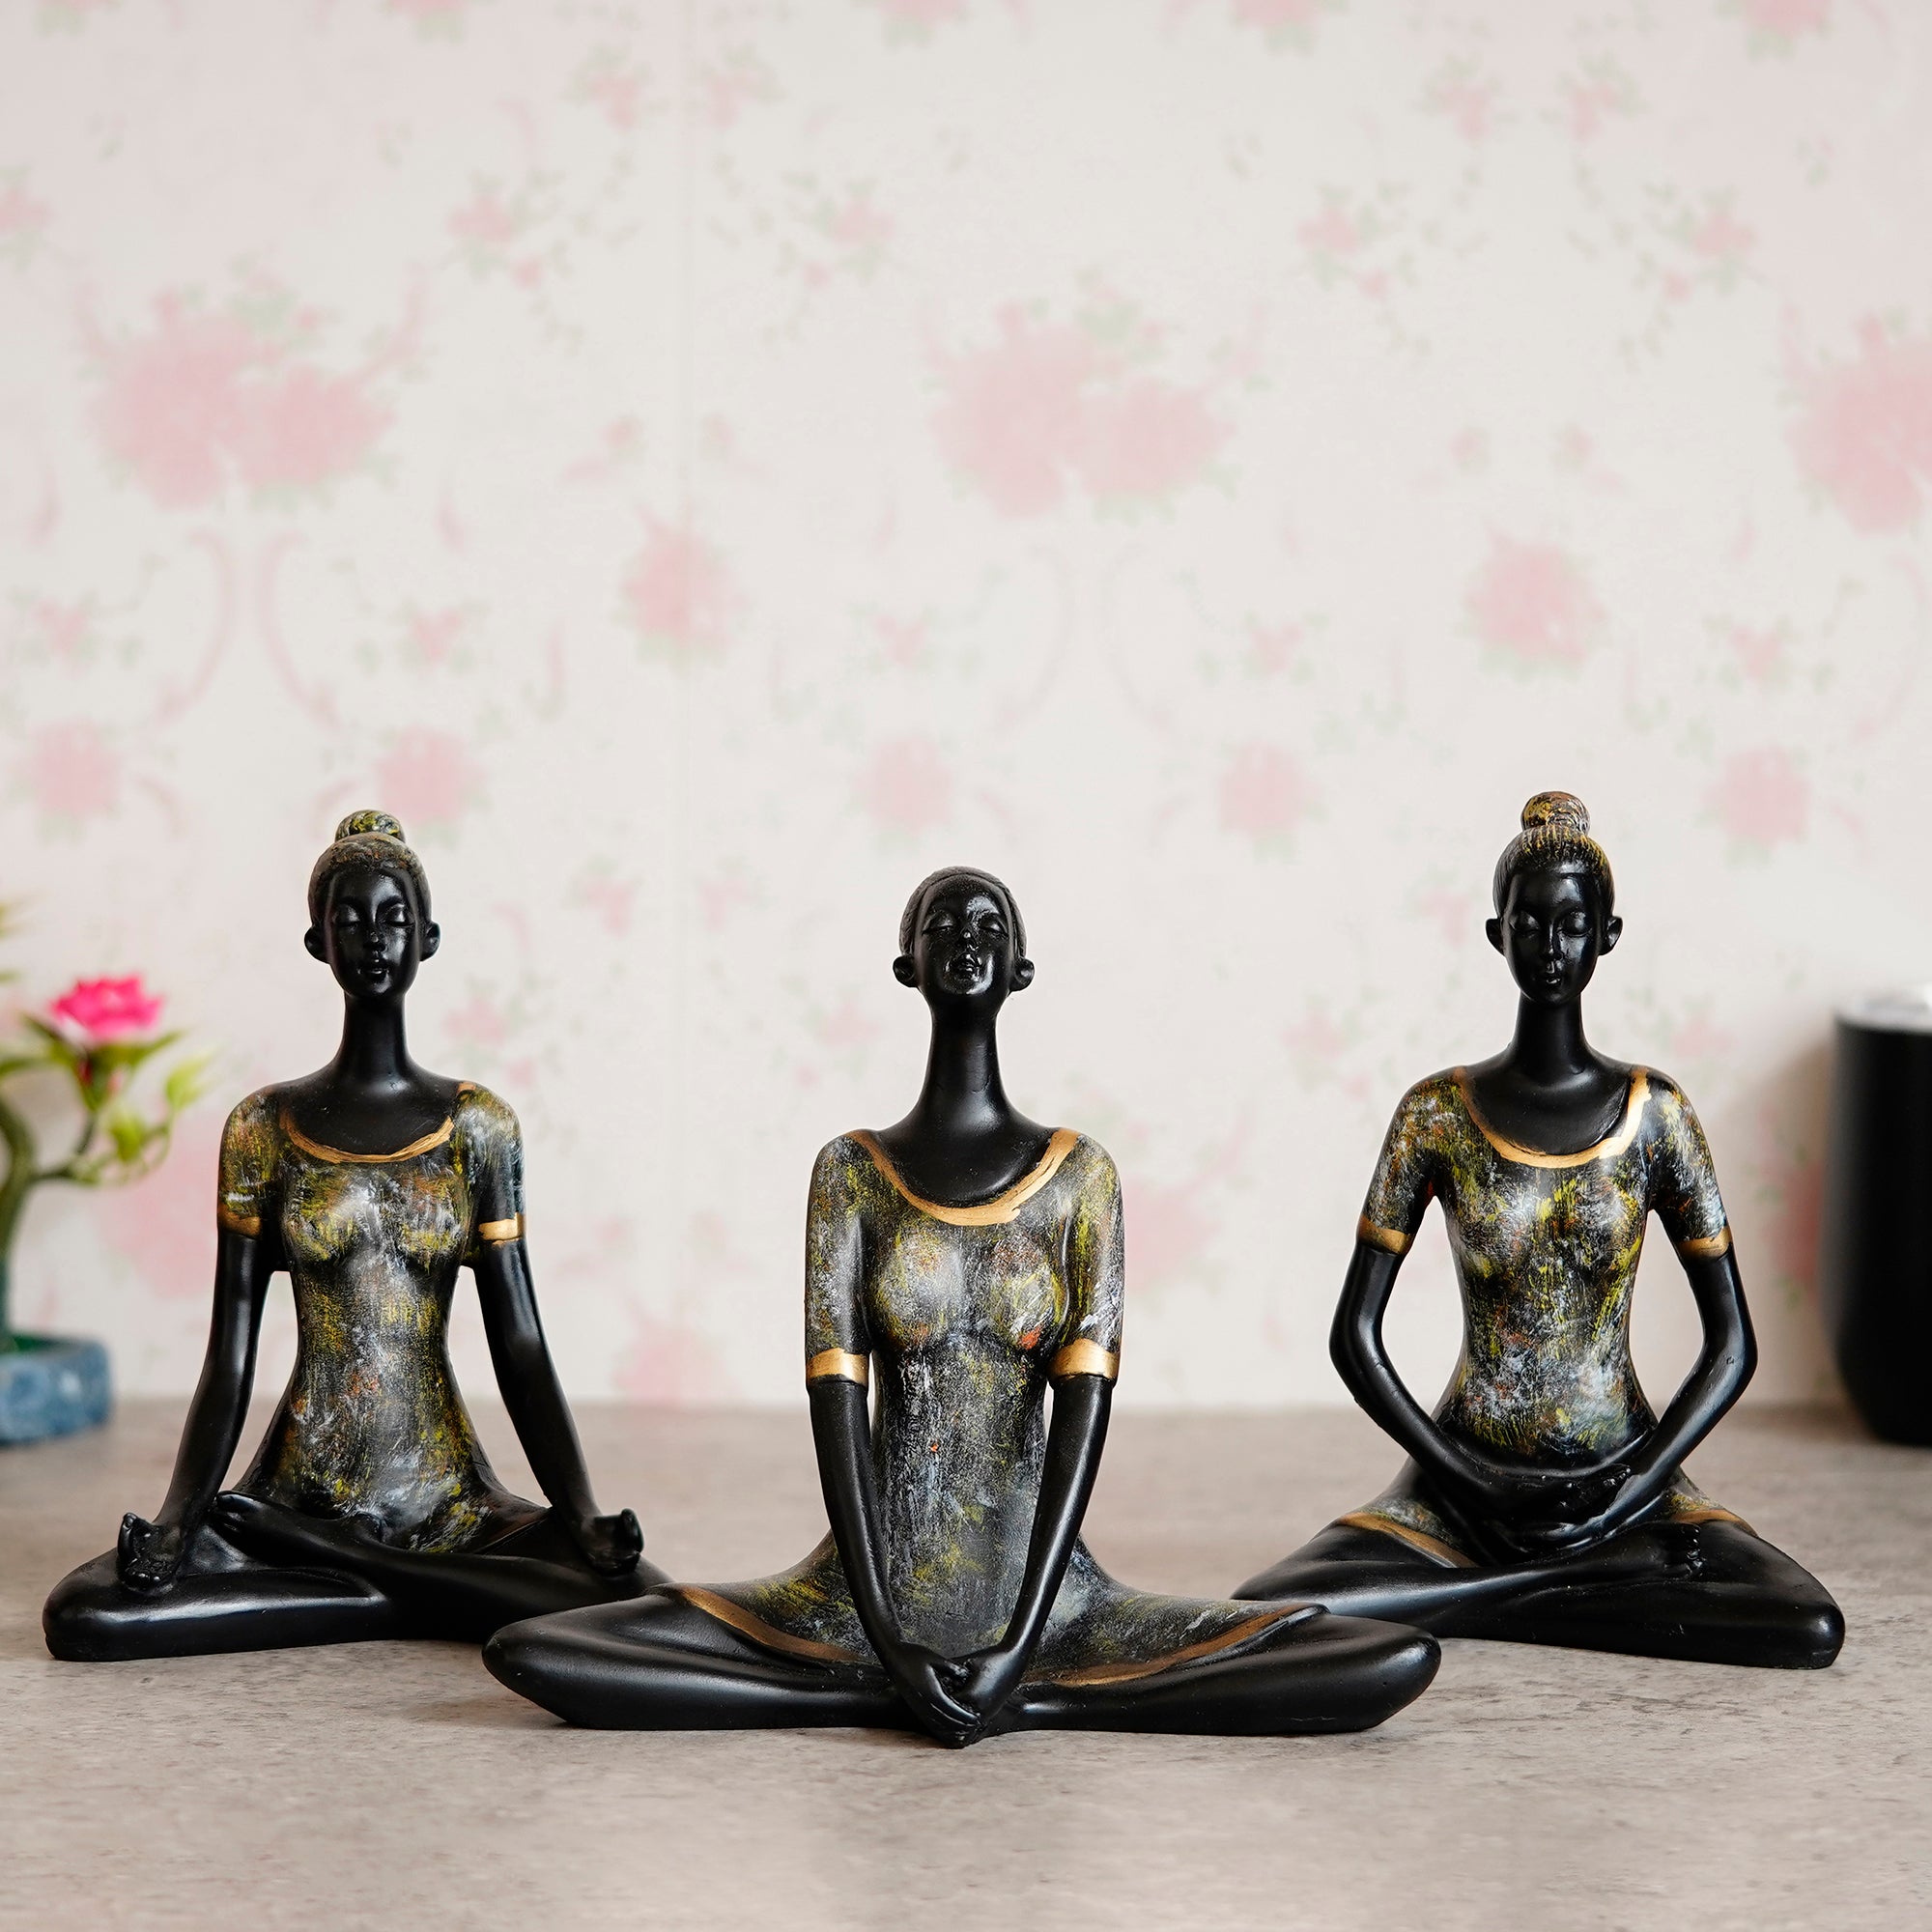 Set of 3 Ladies in Sukhasana, Padmasana, Butterfly Yoga Poses Handcrafted Decorative Polyresin Showpieces